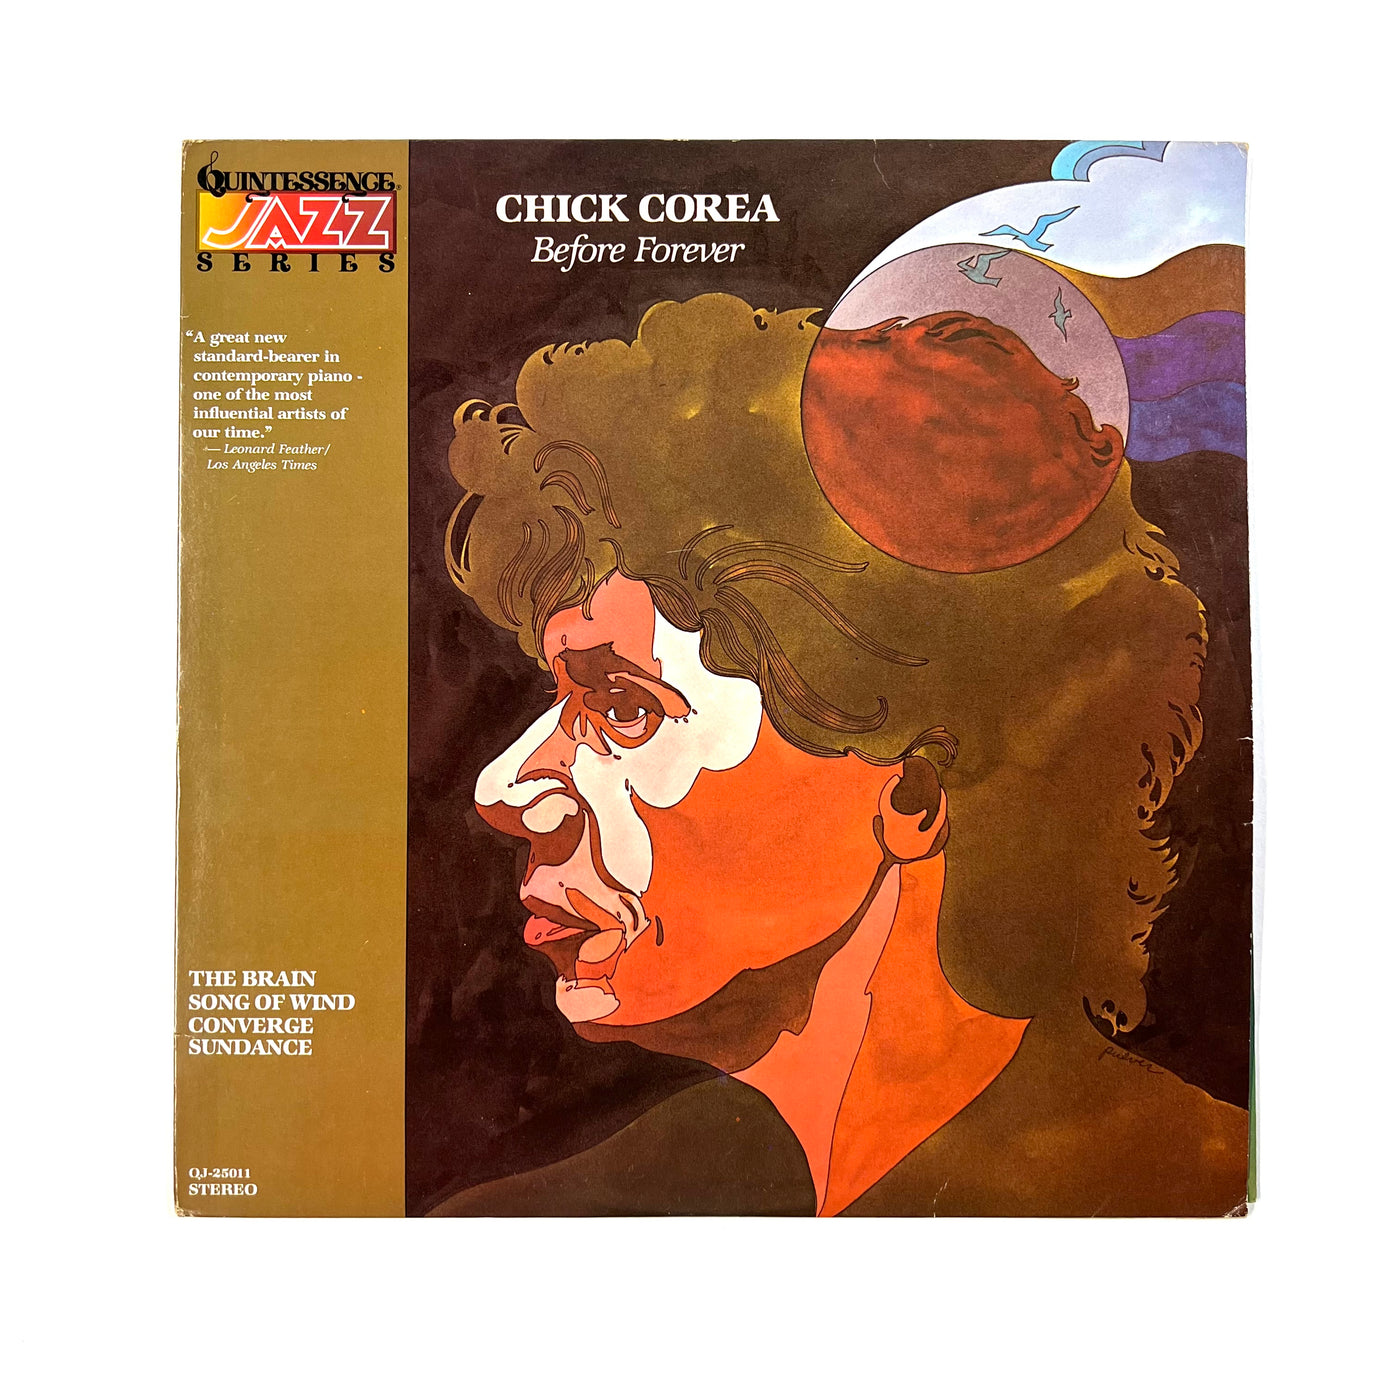 Chick Corea - Before Forever